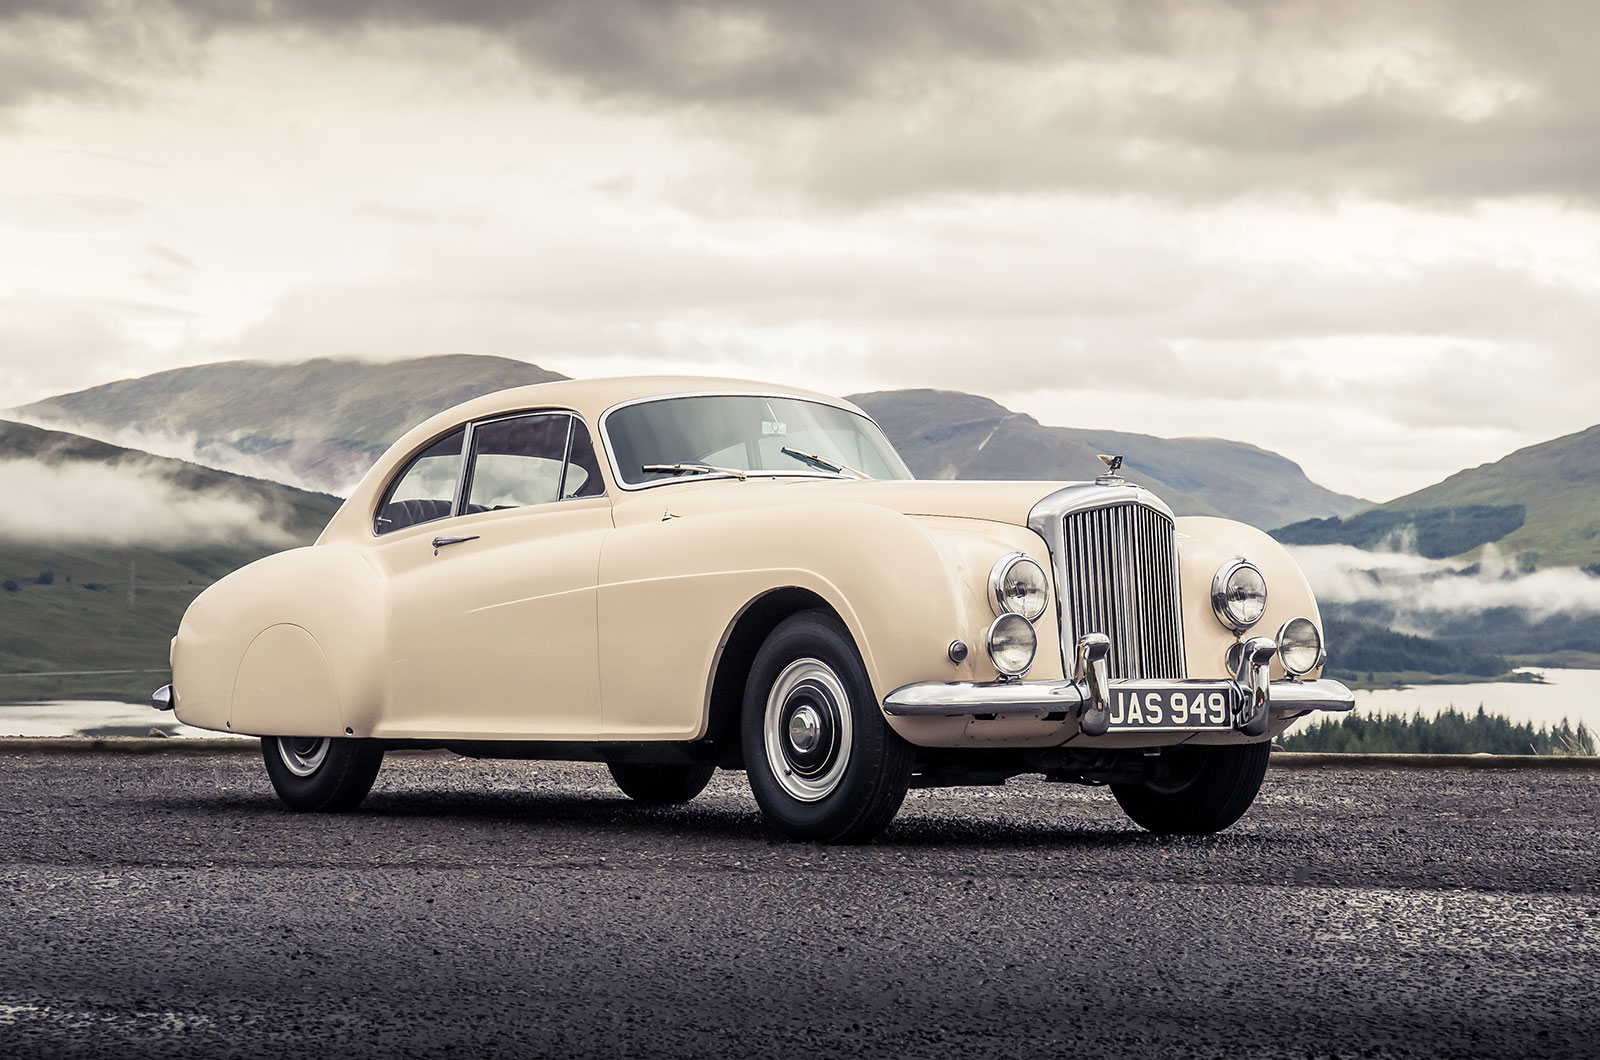 <p><span>Whereas the regular R-Type is now one of the more affordable early post-war Bentleys, in <strong>Continental </strong>form it's one of the most valuable, with prices nudging <strong>US$1.3 million</strong>. Of the <strong>2320 </strong>R-Types made, a mere <strong>207 </strong>were Continentals. Each came with swooping bodywork courtesy of HJ Mulliner and with its improved aerodynamics the R-Type Continental was the world's fastest four-seat production car.</span></p>